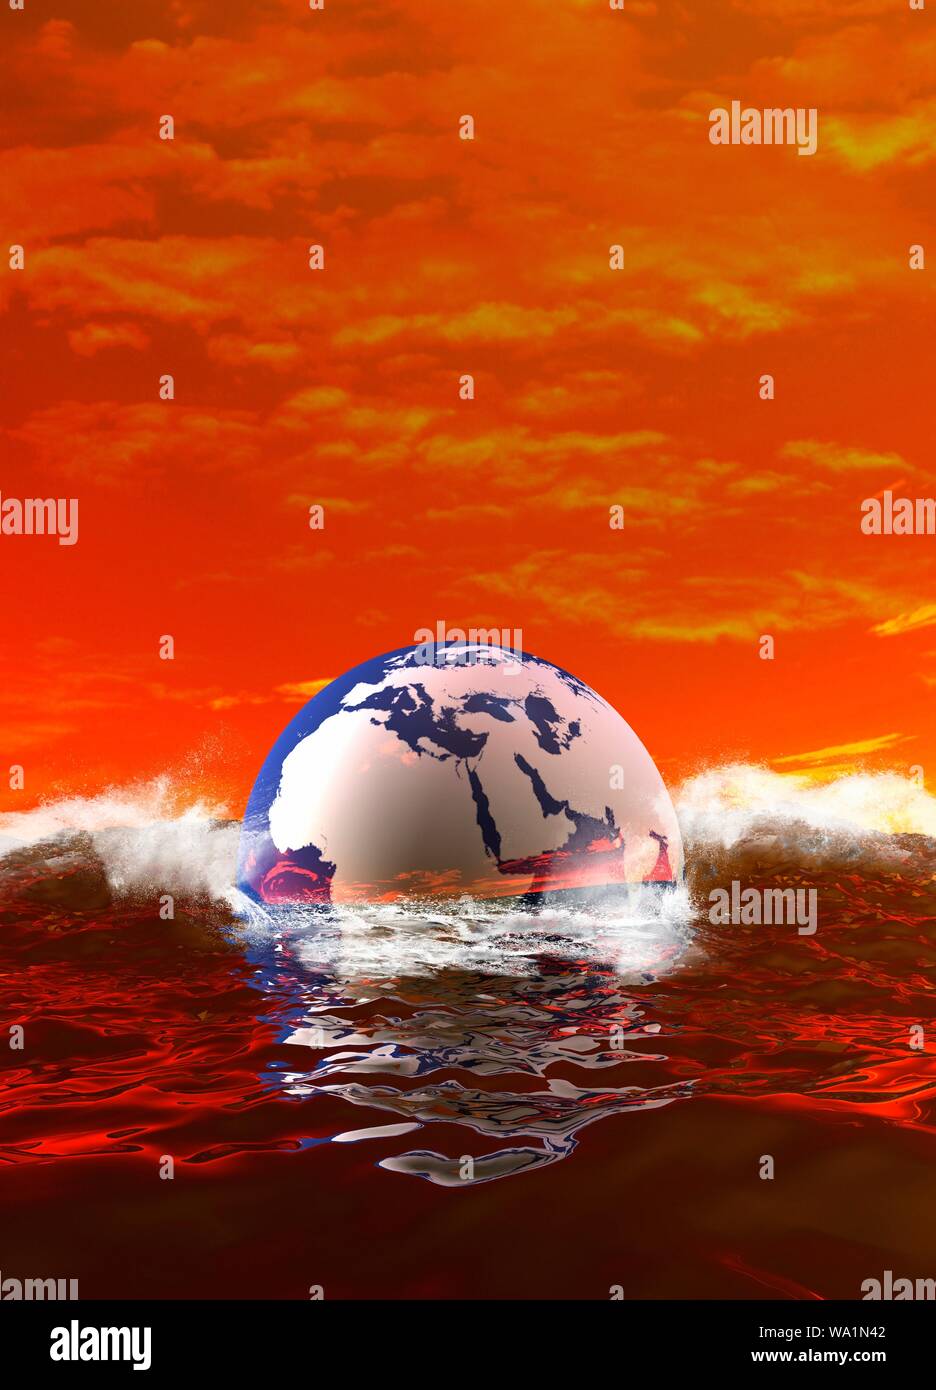 Global warming and rising sea levels, conceptual illustration. Stock Photo